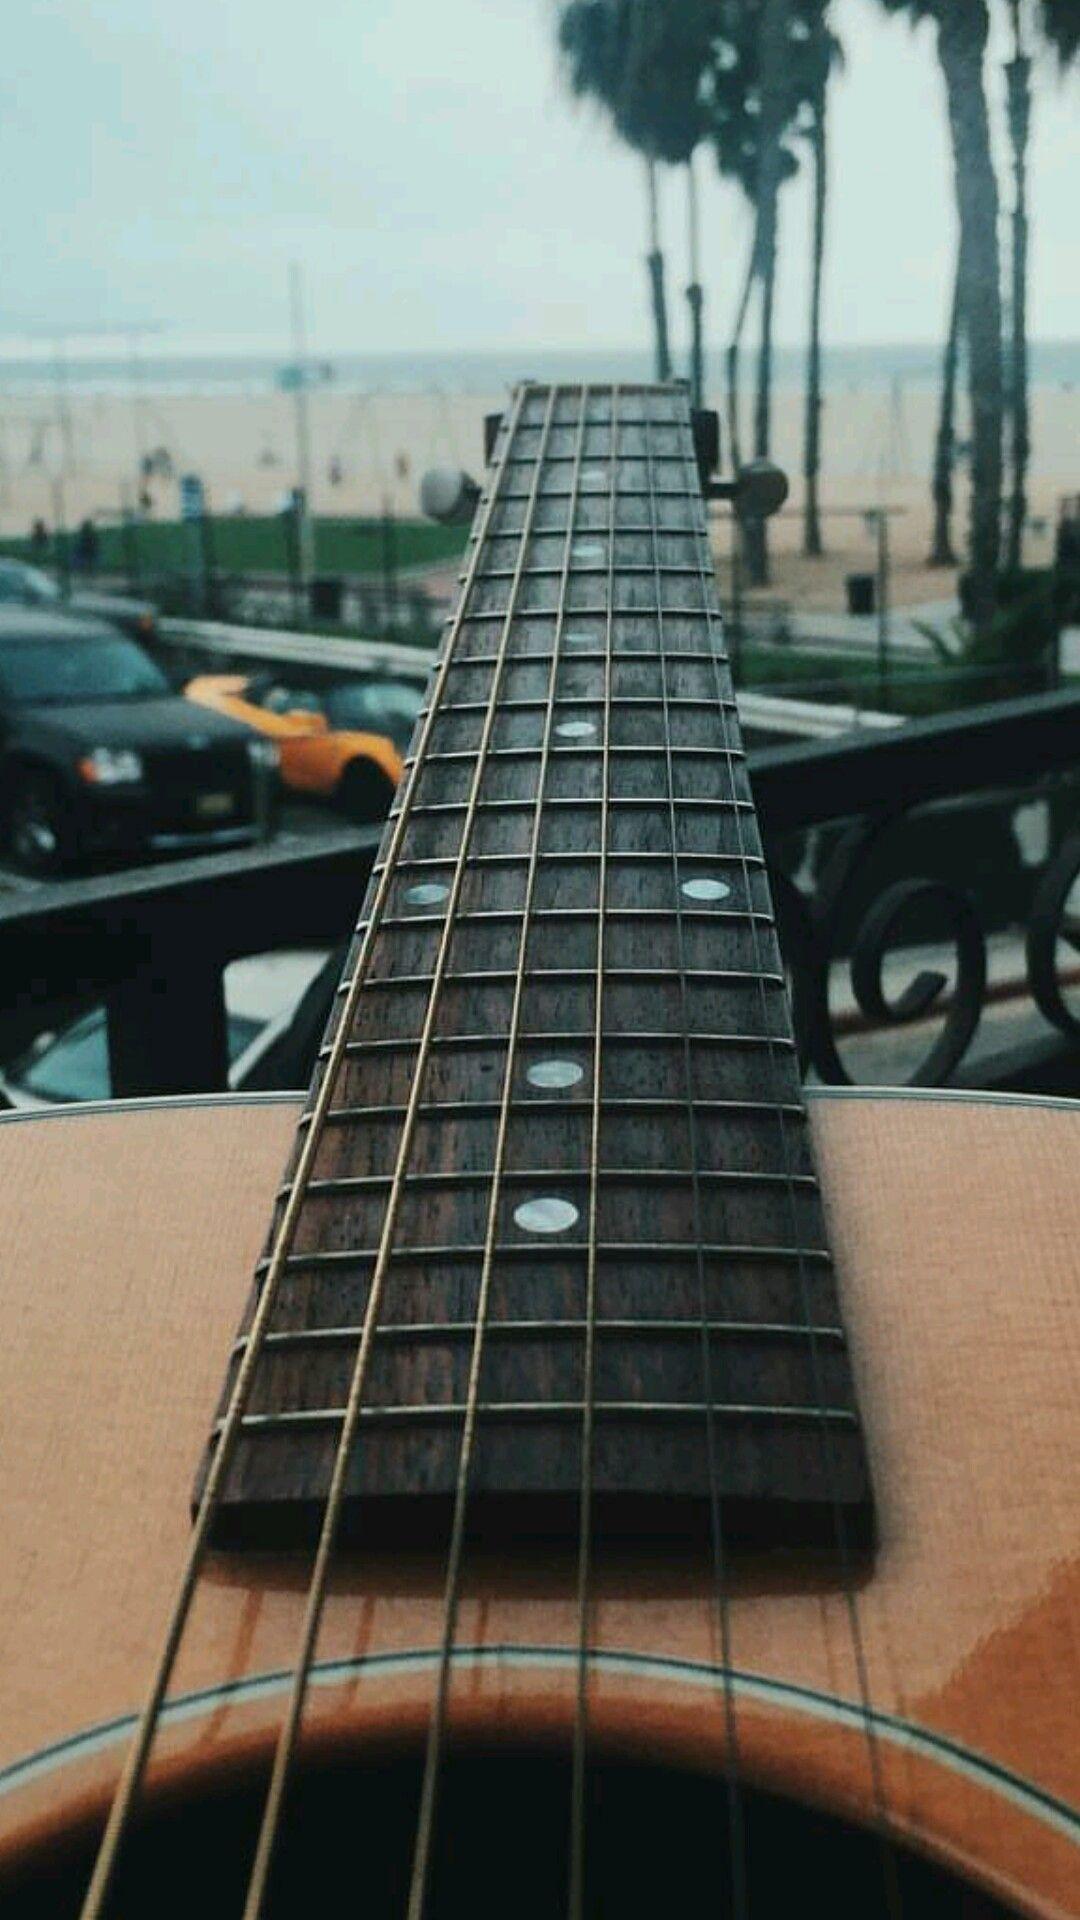 Guitar wallpaper from Alex Aiono post on Instagram. Wallpaper